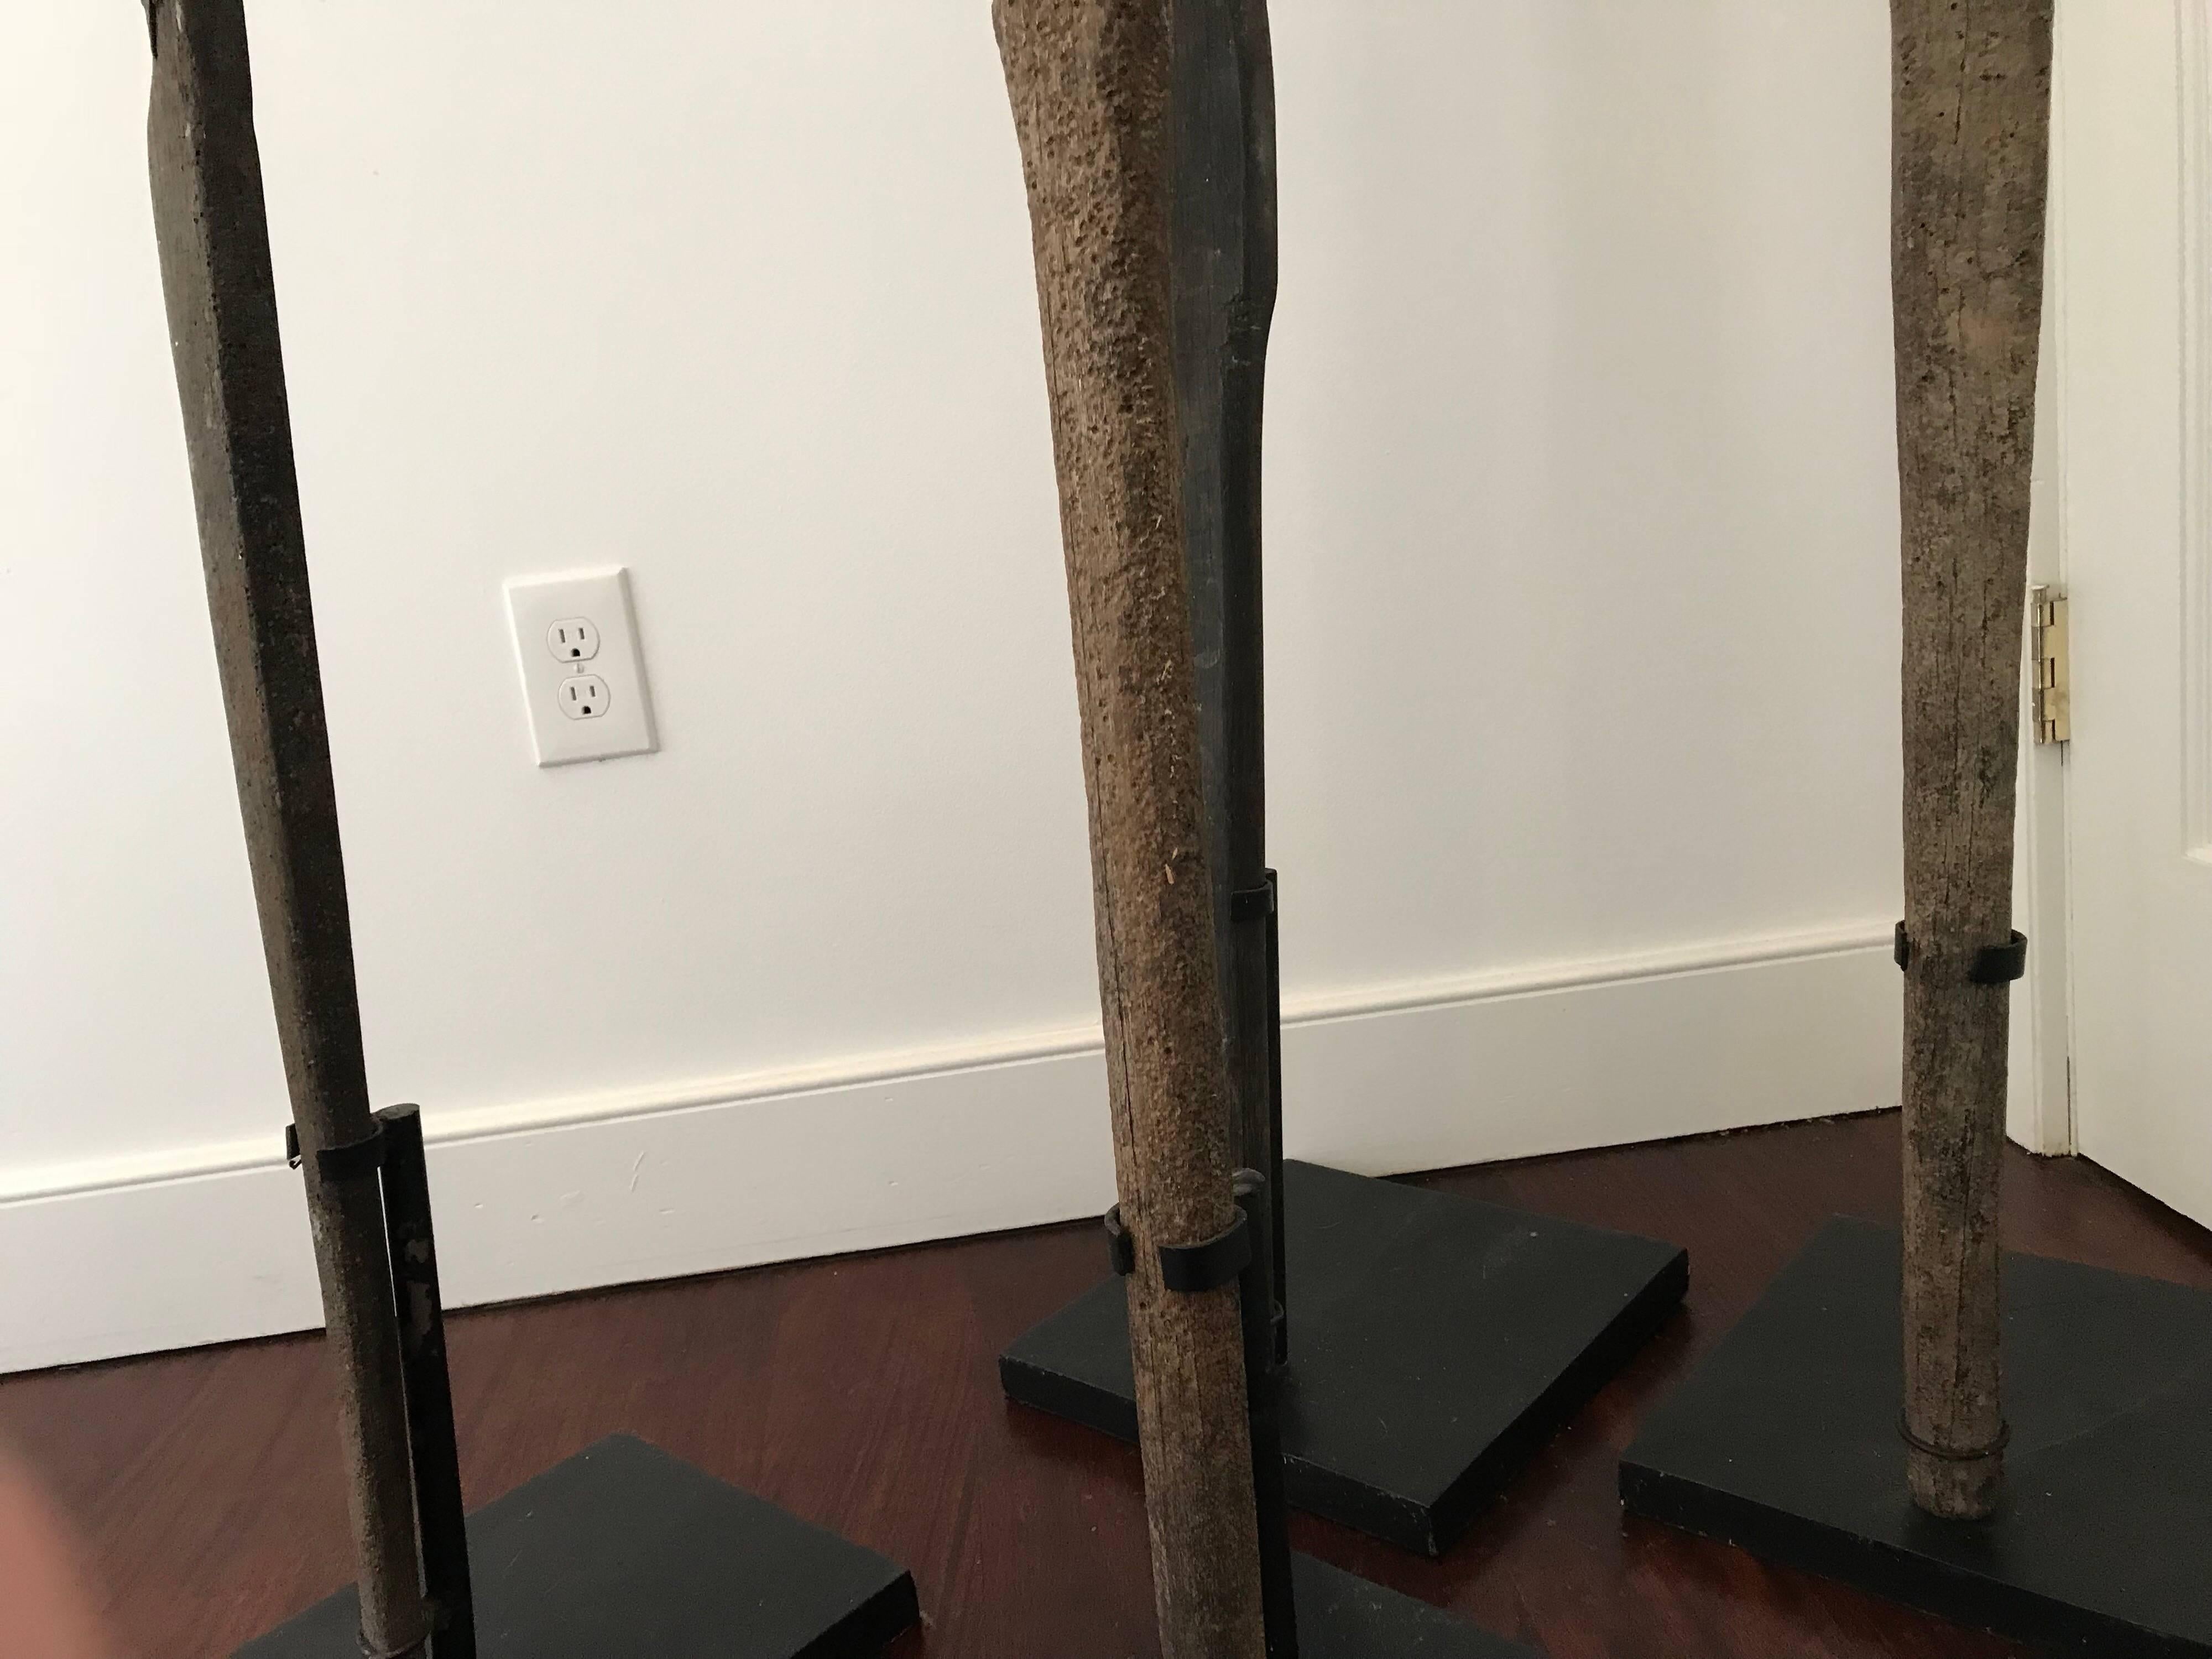 A set of four antique wood oars of various height from Bali. Each mounted on museum quality metal base. Tallest measures 112